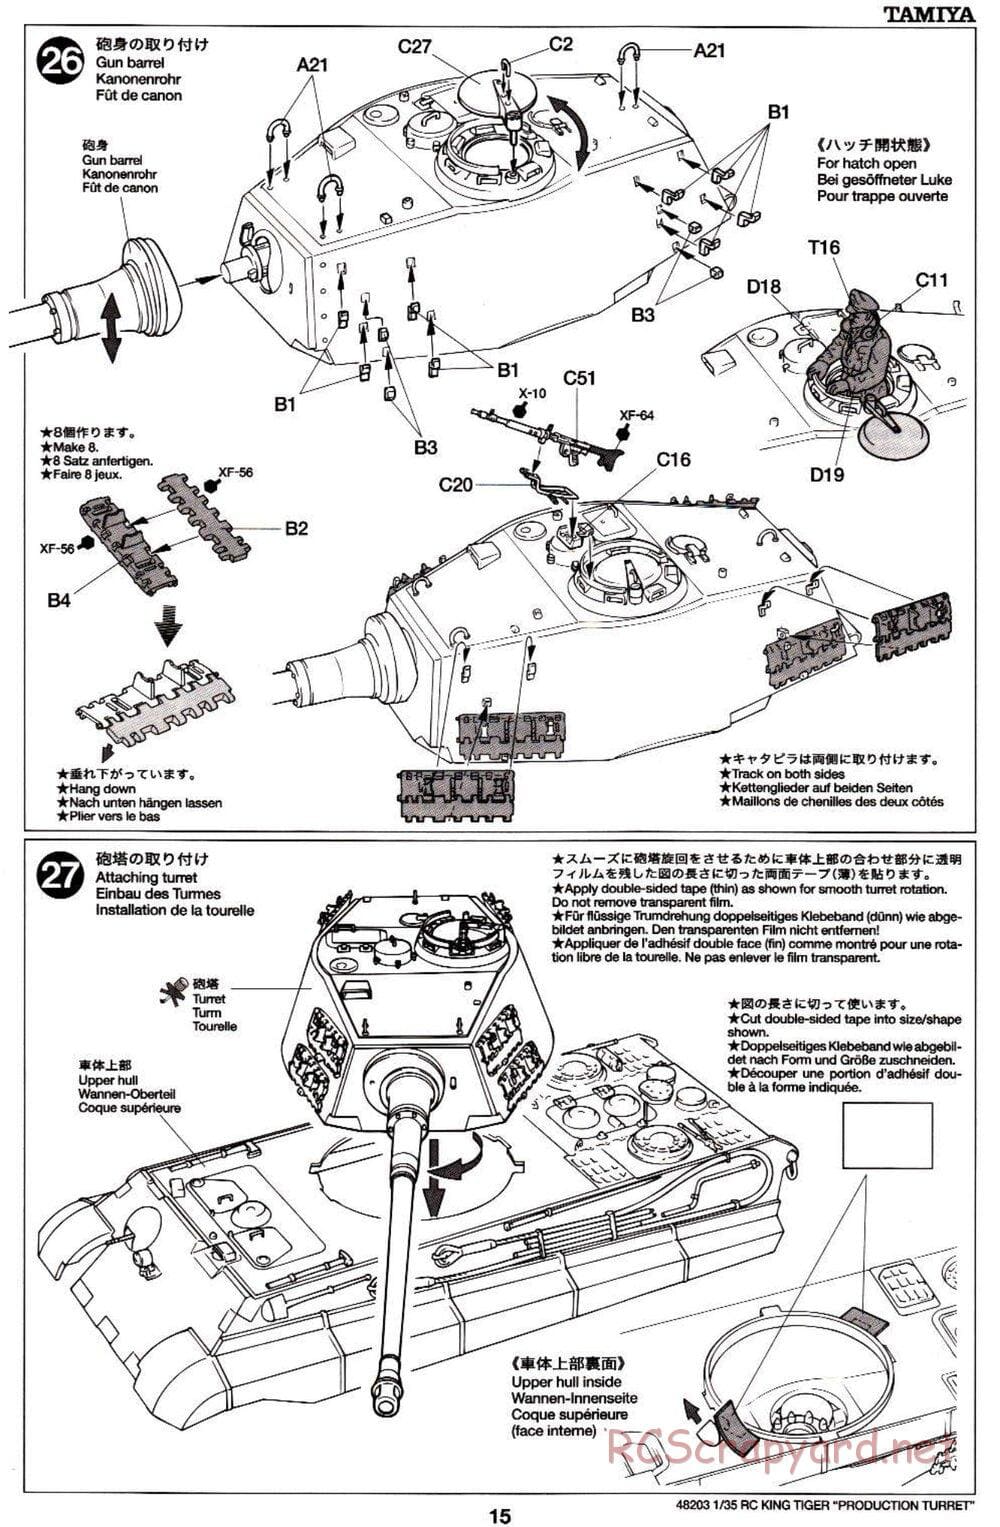 Tamiya - German King Tiger (Production Turret) - 1/35 Scale Chassis - Manual - Page 15